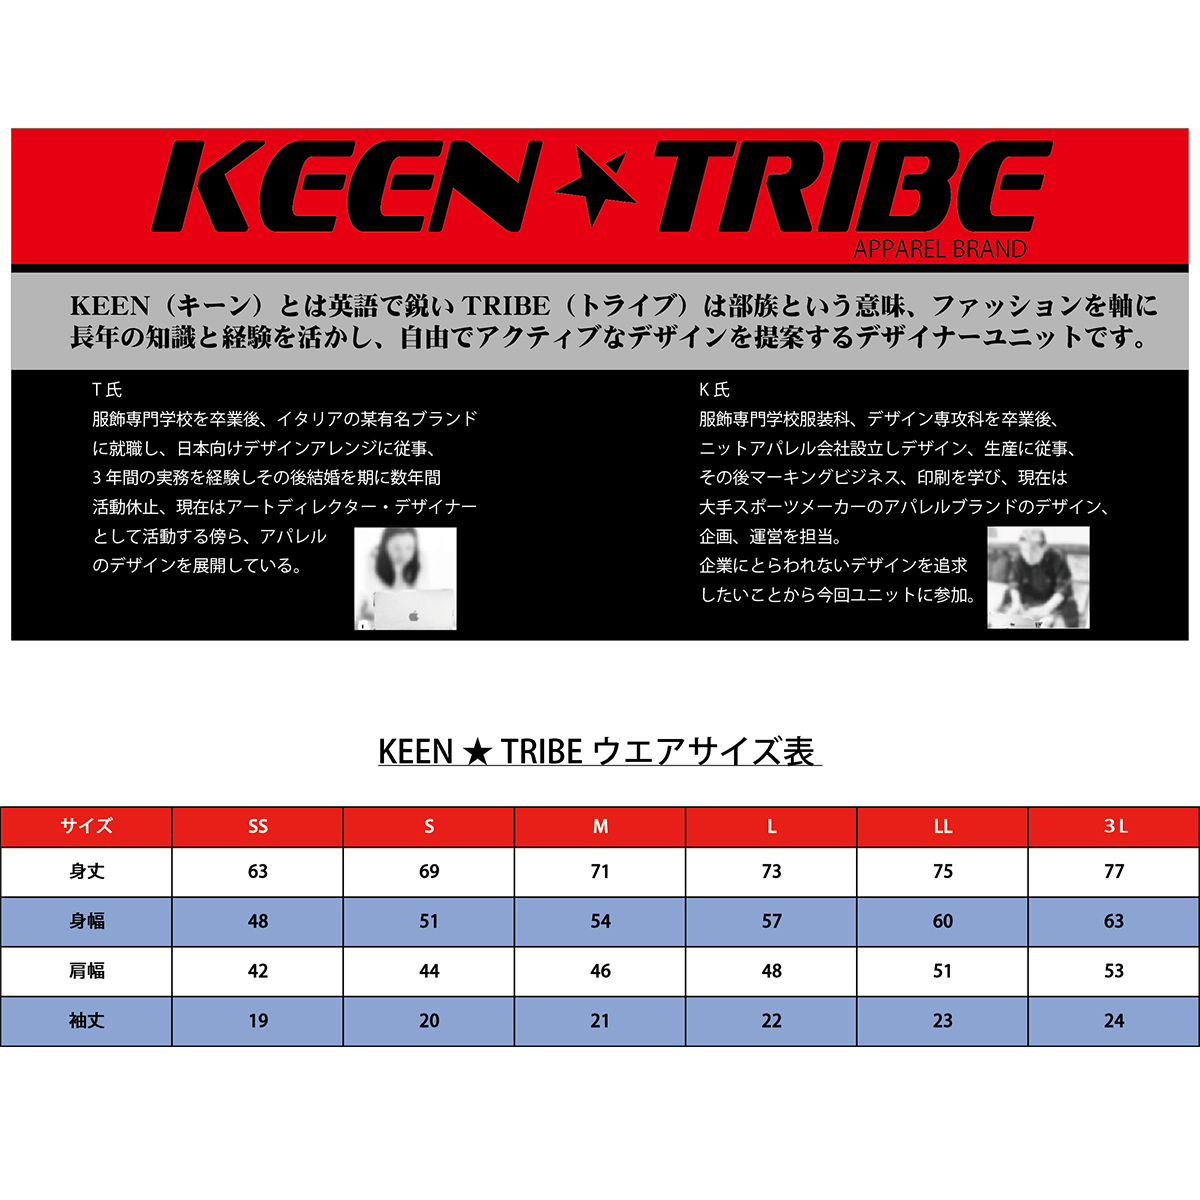 KEEN ★ TRIBE　KT-66(受注生産)